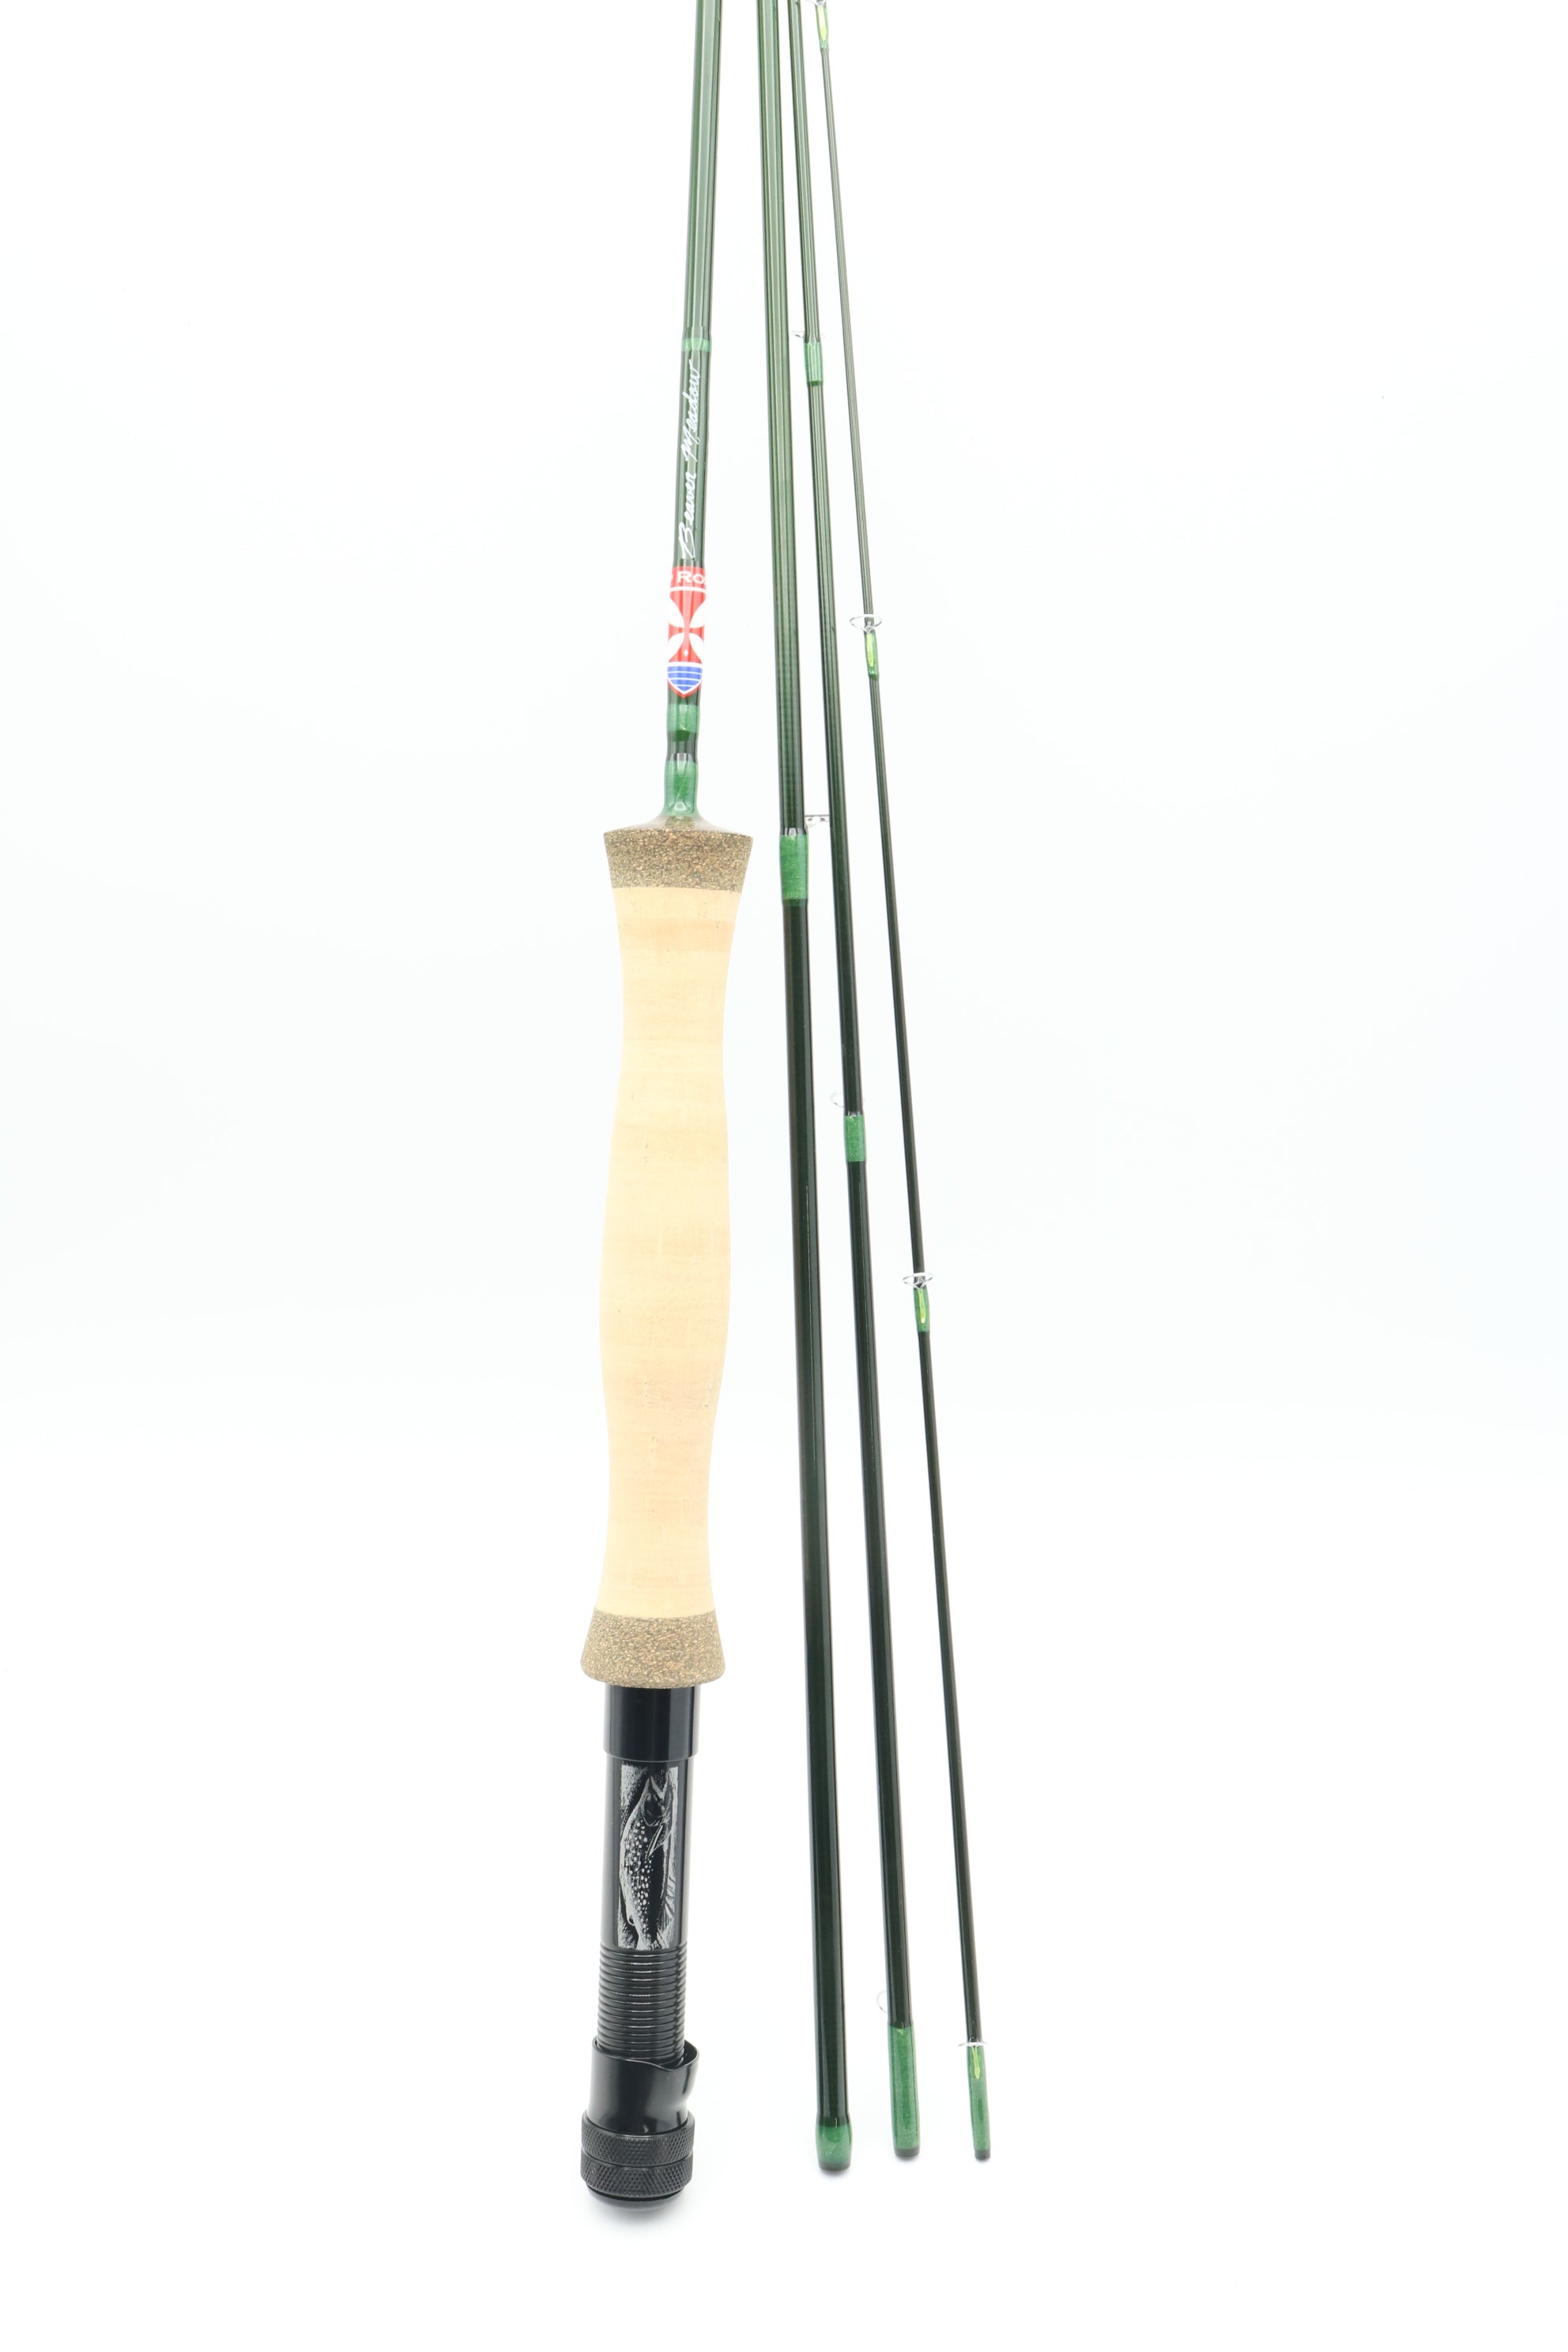 Beaver Meadow Adams Rod and Outfits, refined, simple, & value priced.